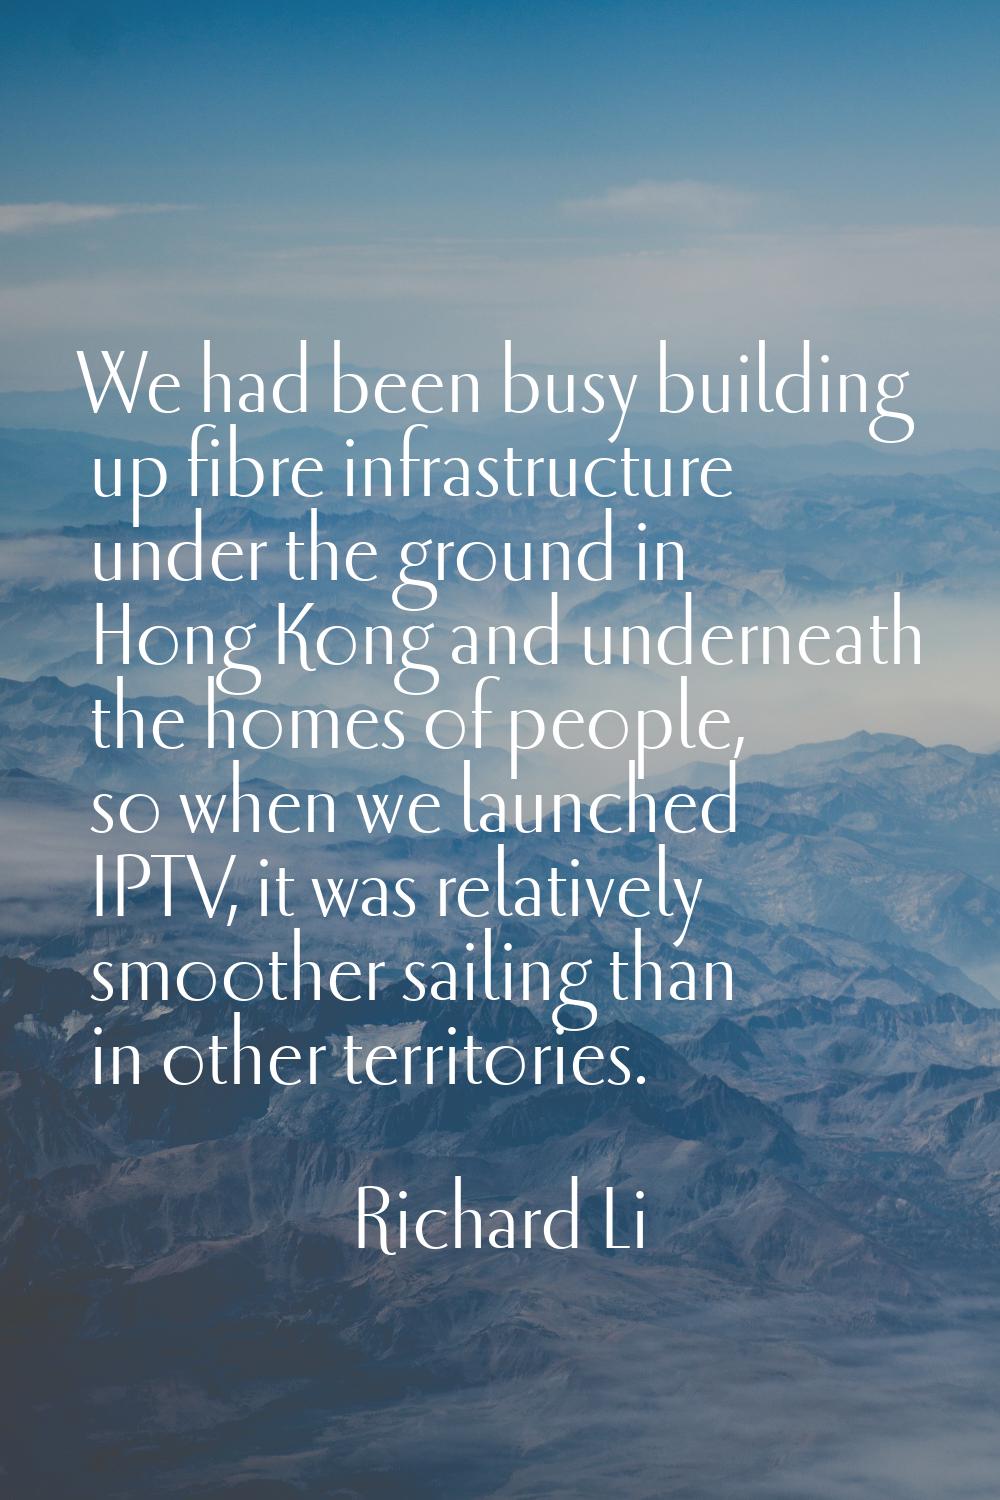 We had been busy building up fibre infrastructure under the ground in Hong Kong and underneath the 